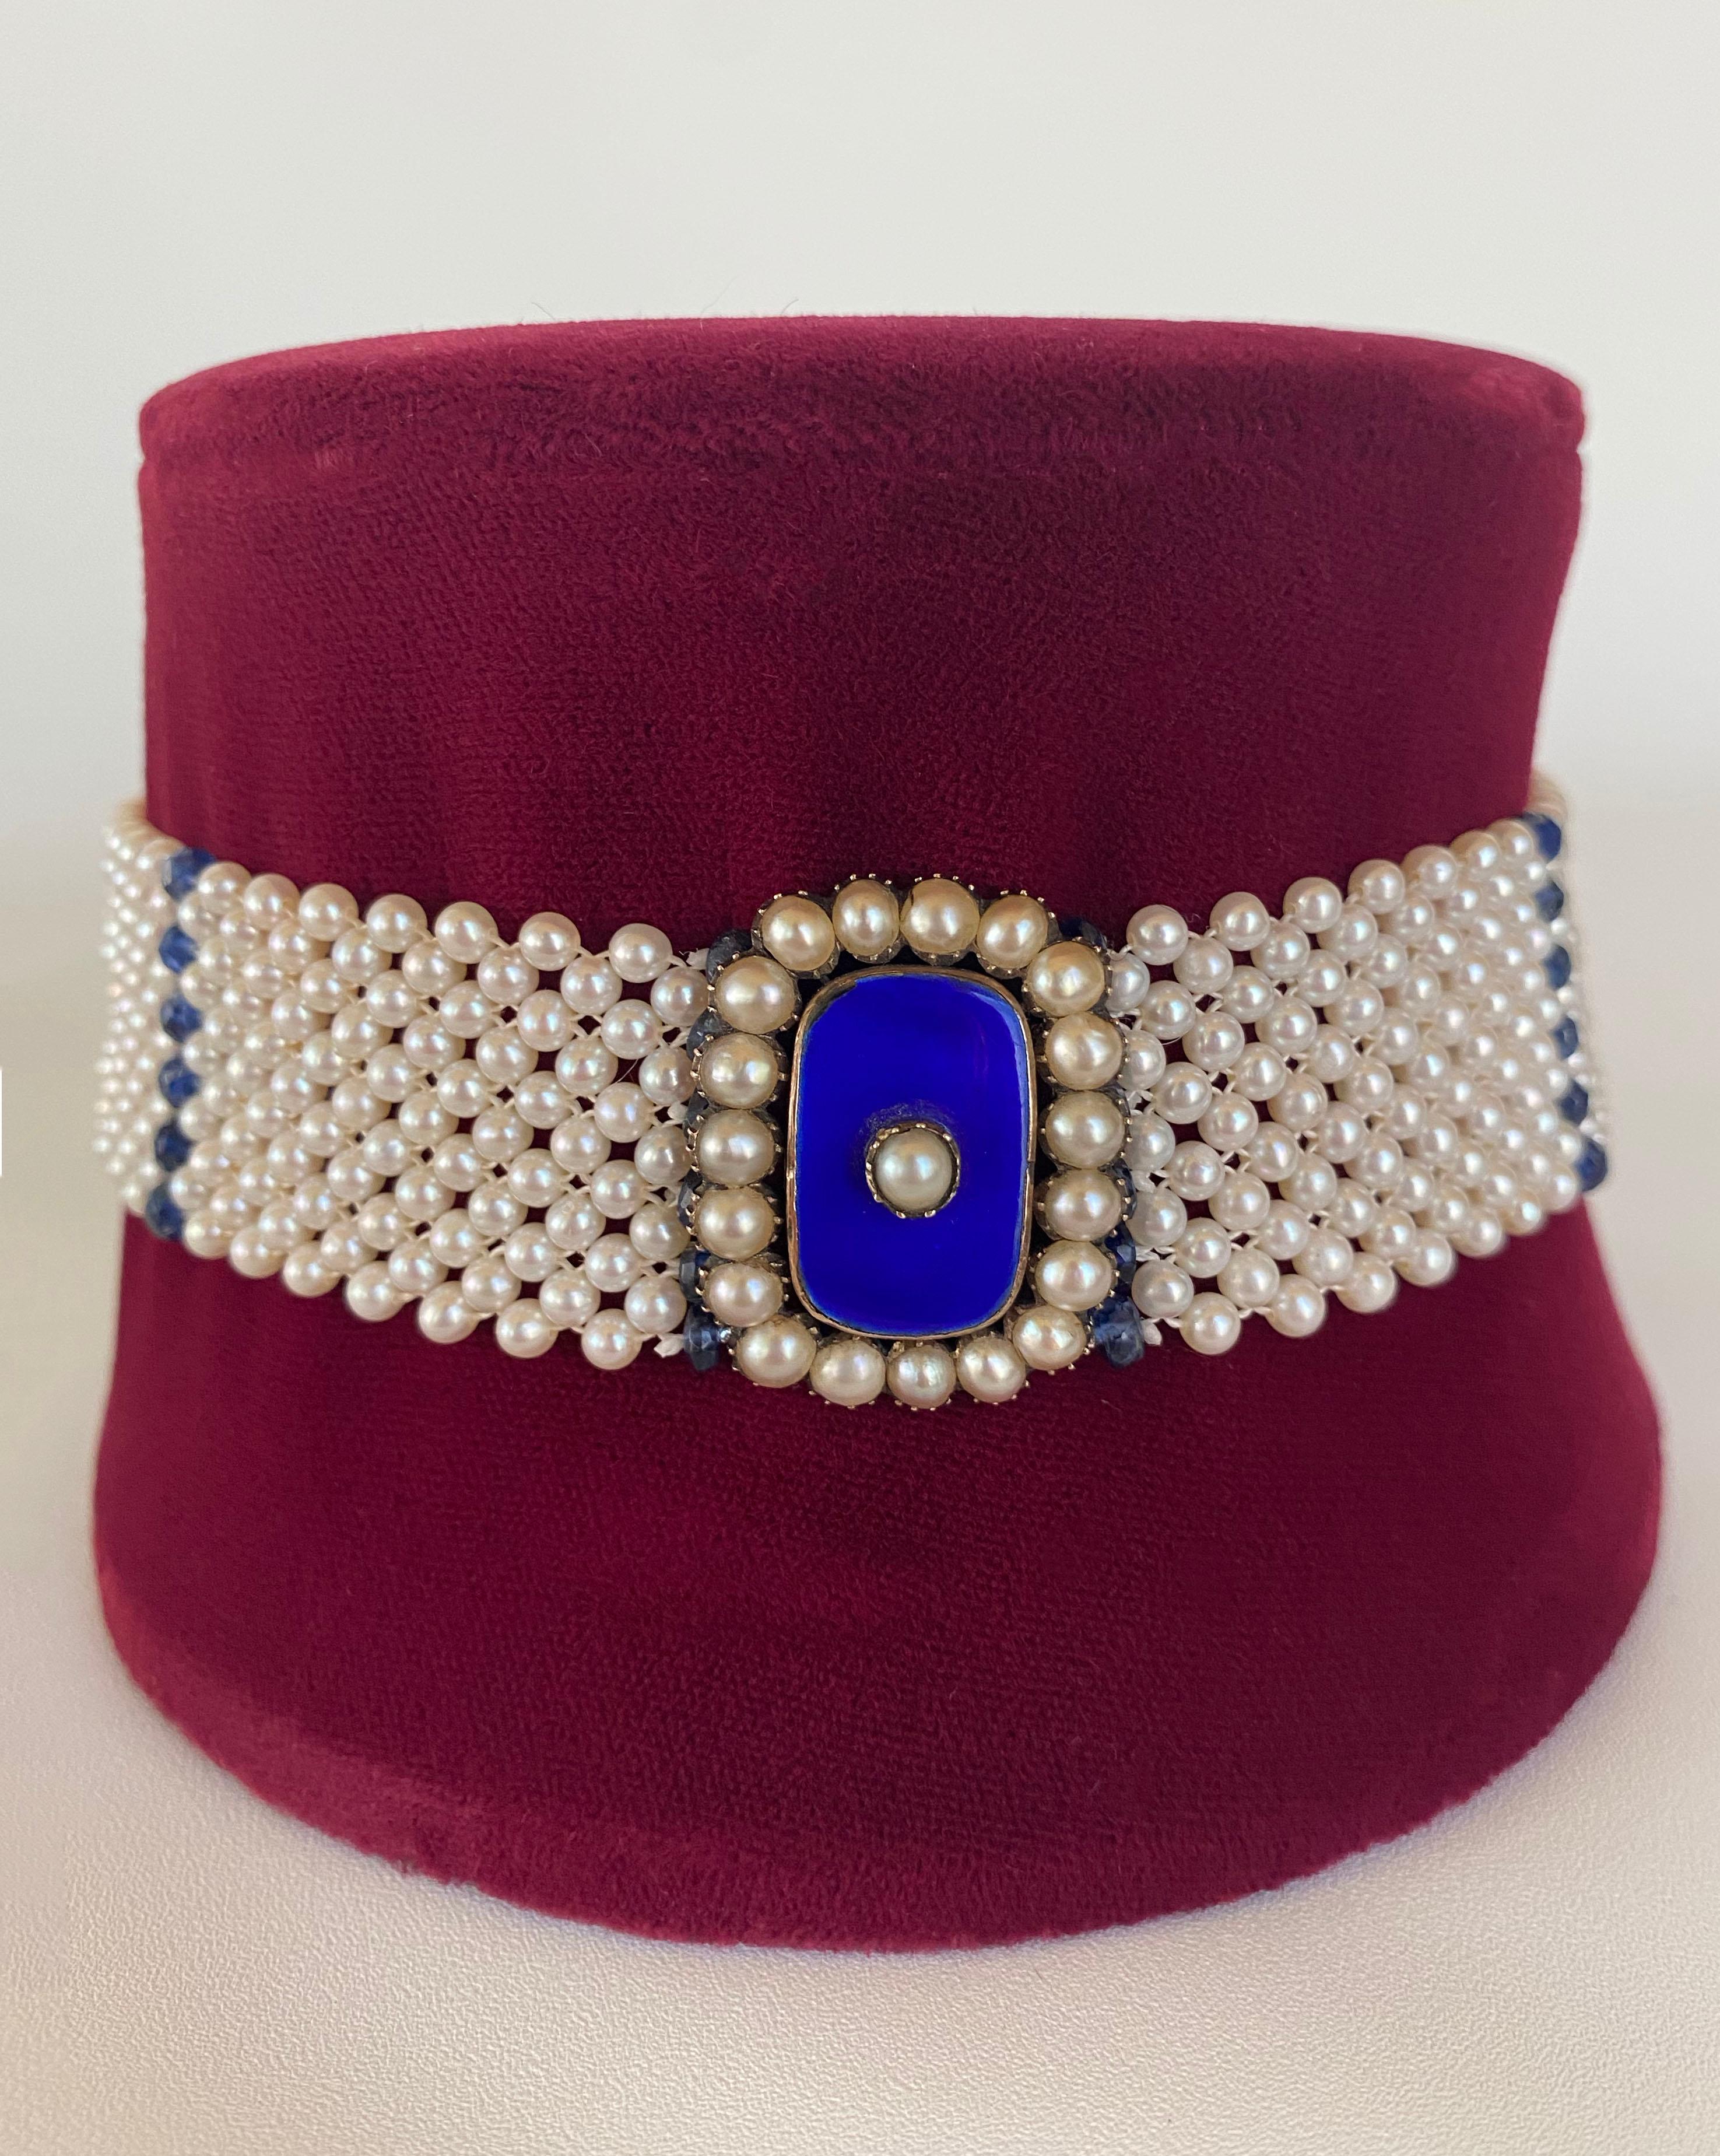 Gorgeous Vintage 1920s Enamel Centerpiece with original Natural Pearls reimagined into a stunning Choker. The centerpiece radiates a vibrant Royal Blue color that cannot be missed, complimented by high luster white Pearls which display a beautiful